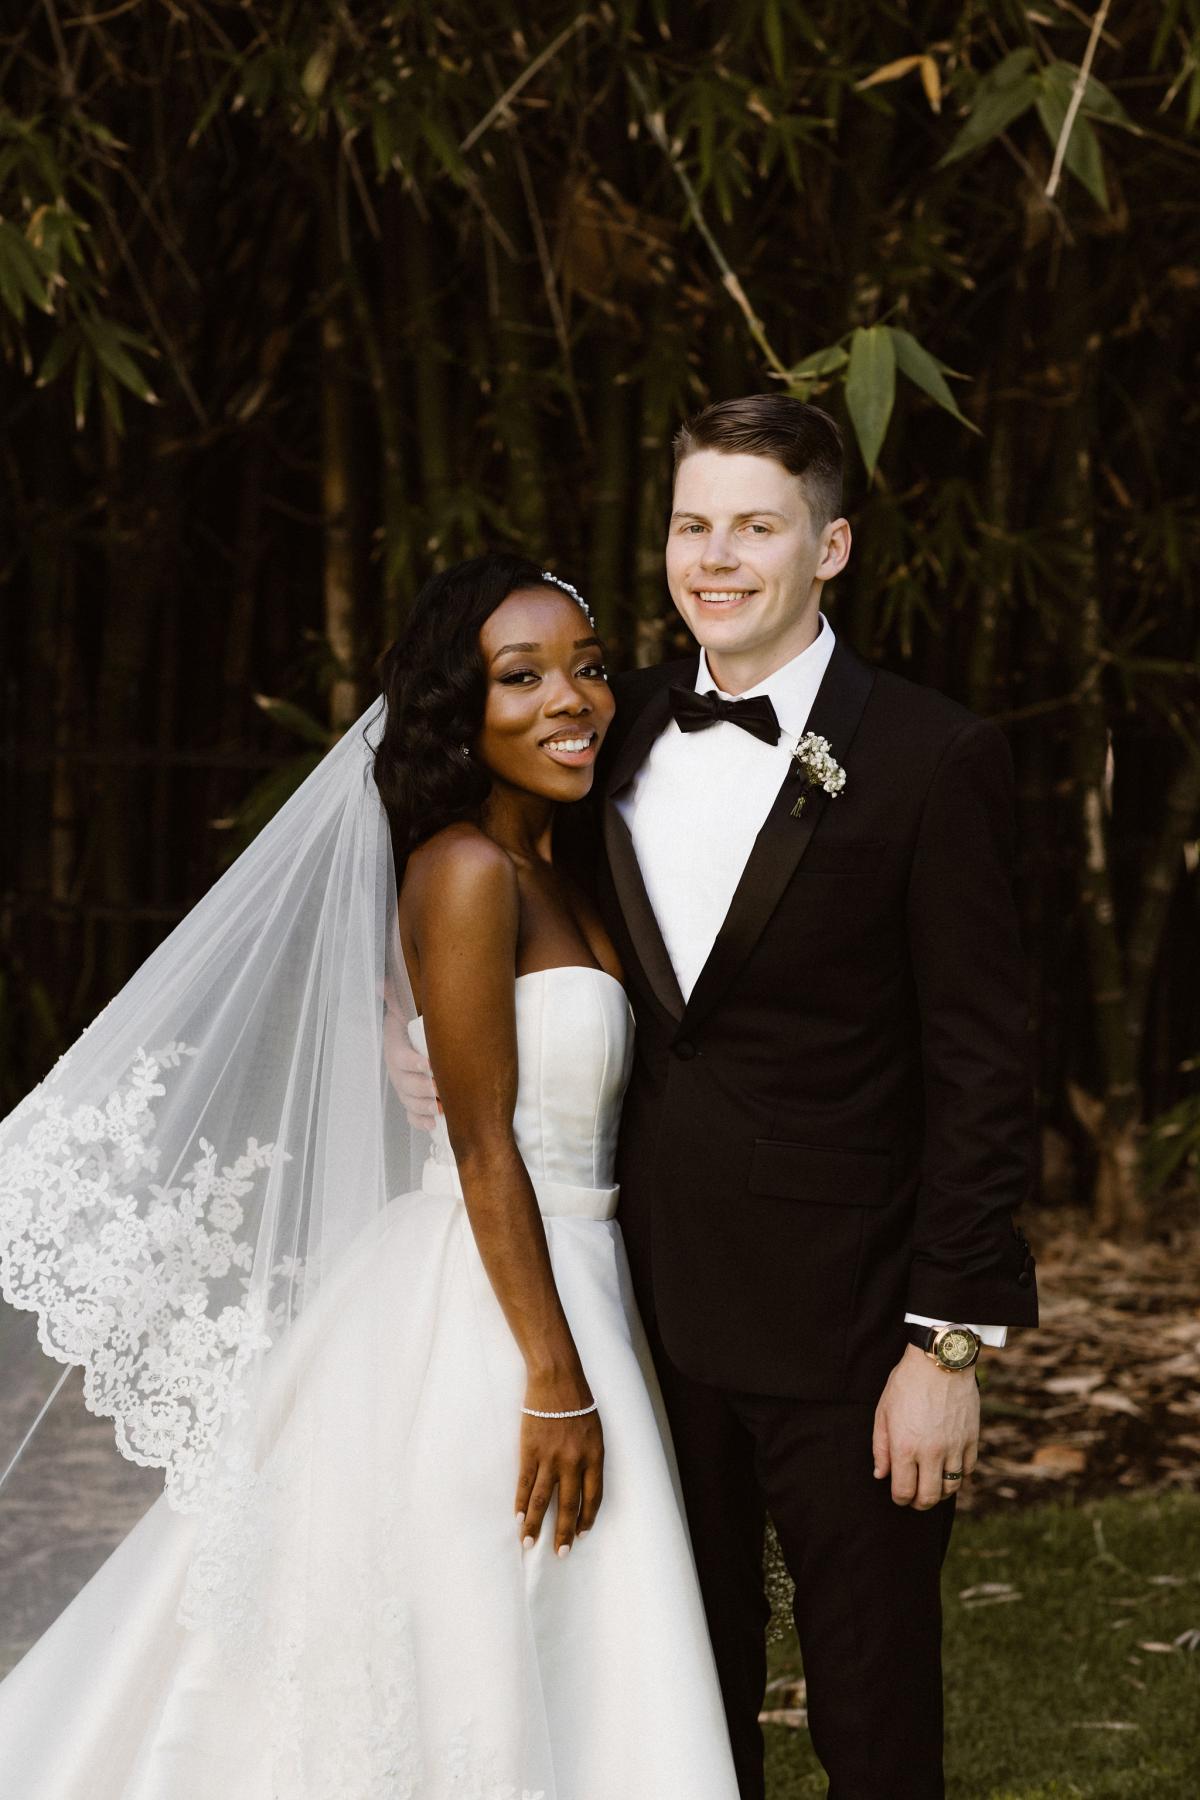 Real bride Ancille stands with new hubby Dar in front of foliage. She pairs her classic Kitty Melanie gown by KWH with a detailed lace veil by Steven Khalil